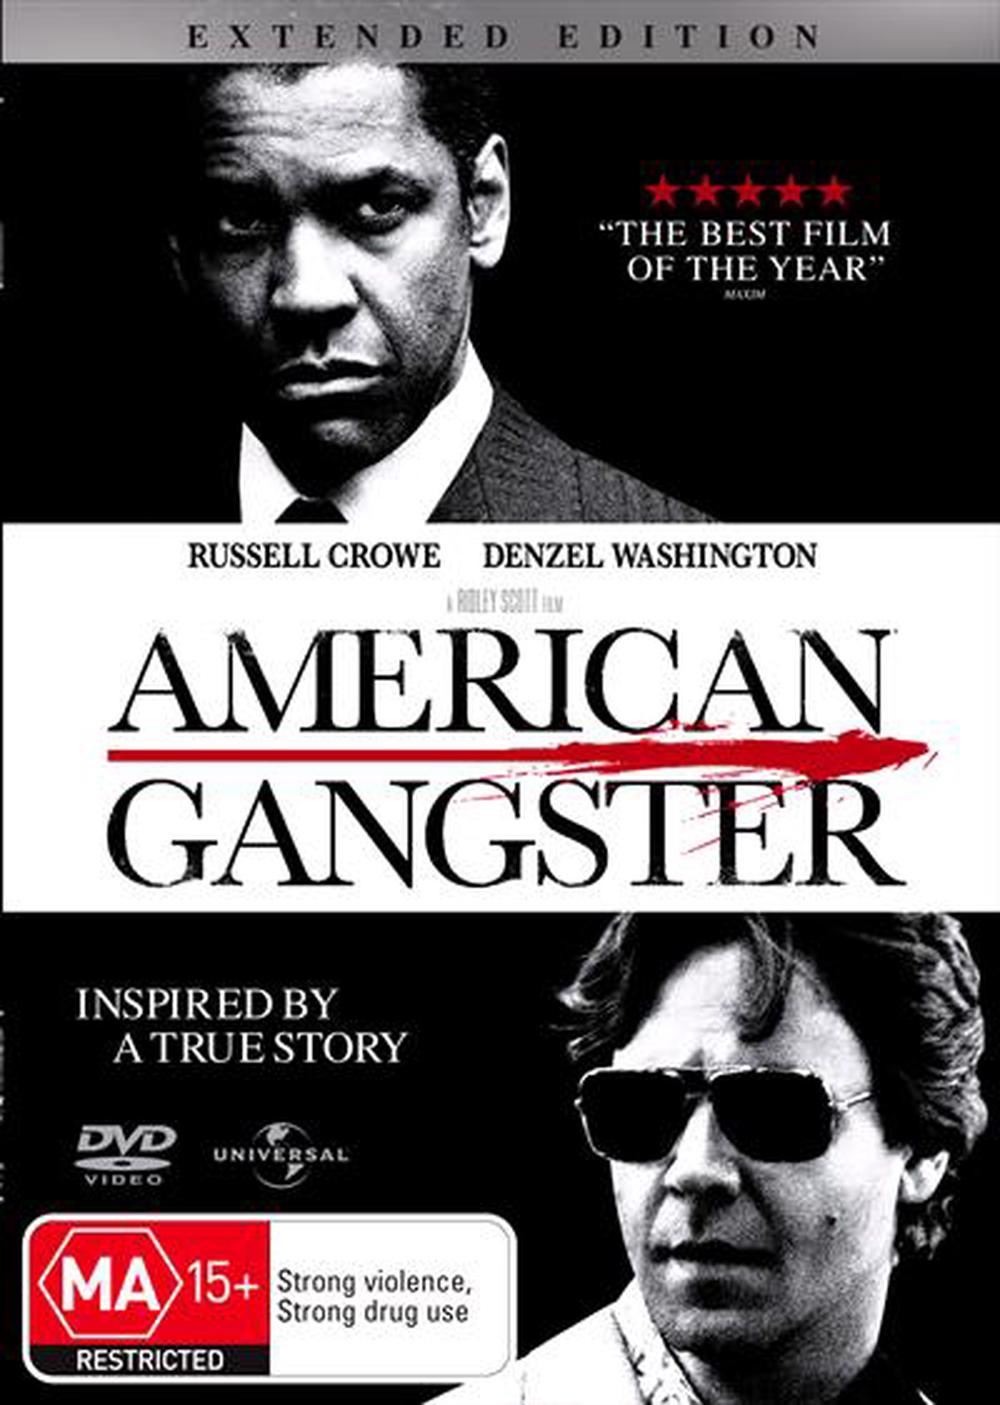 American Gangster Extended Editition Dvd Buy Online At The Nile